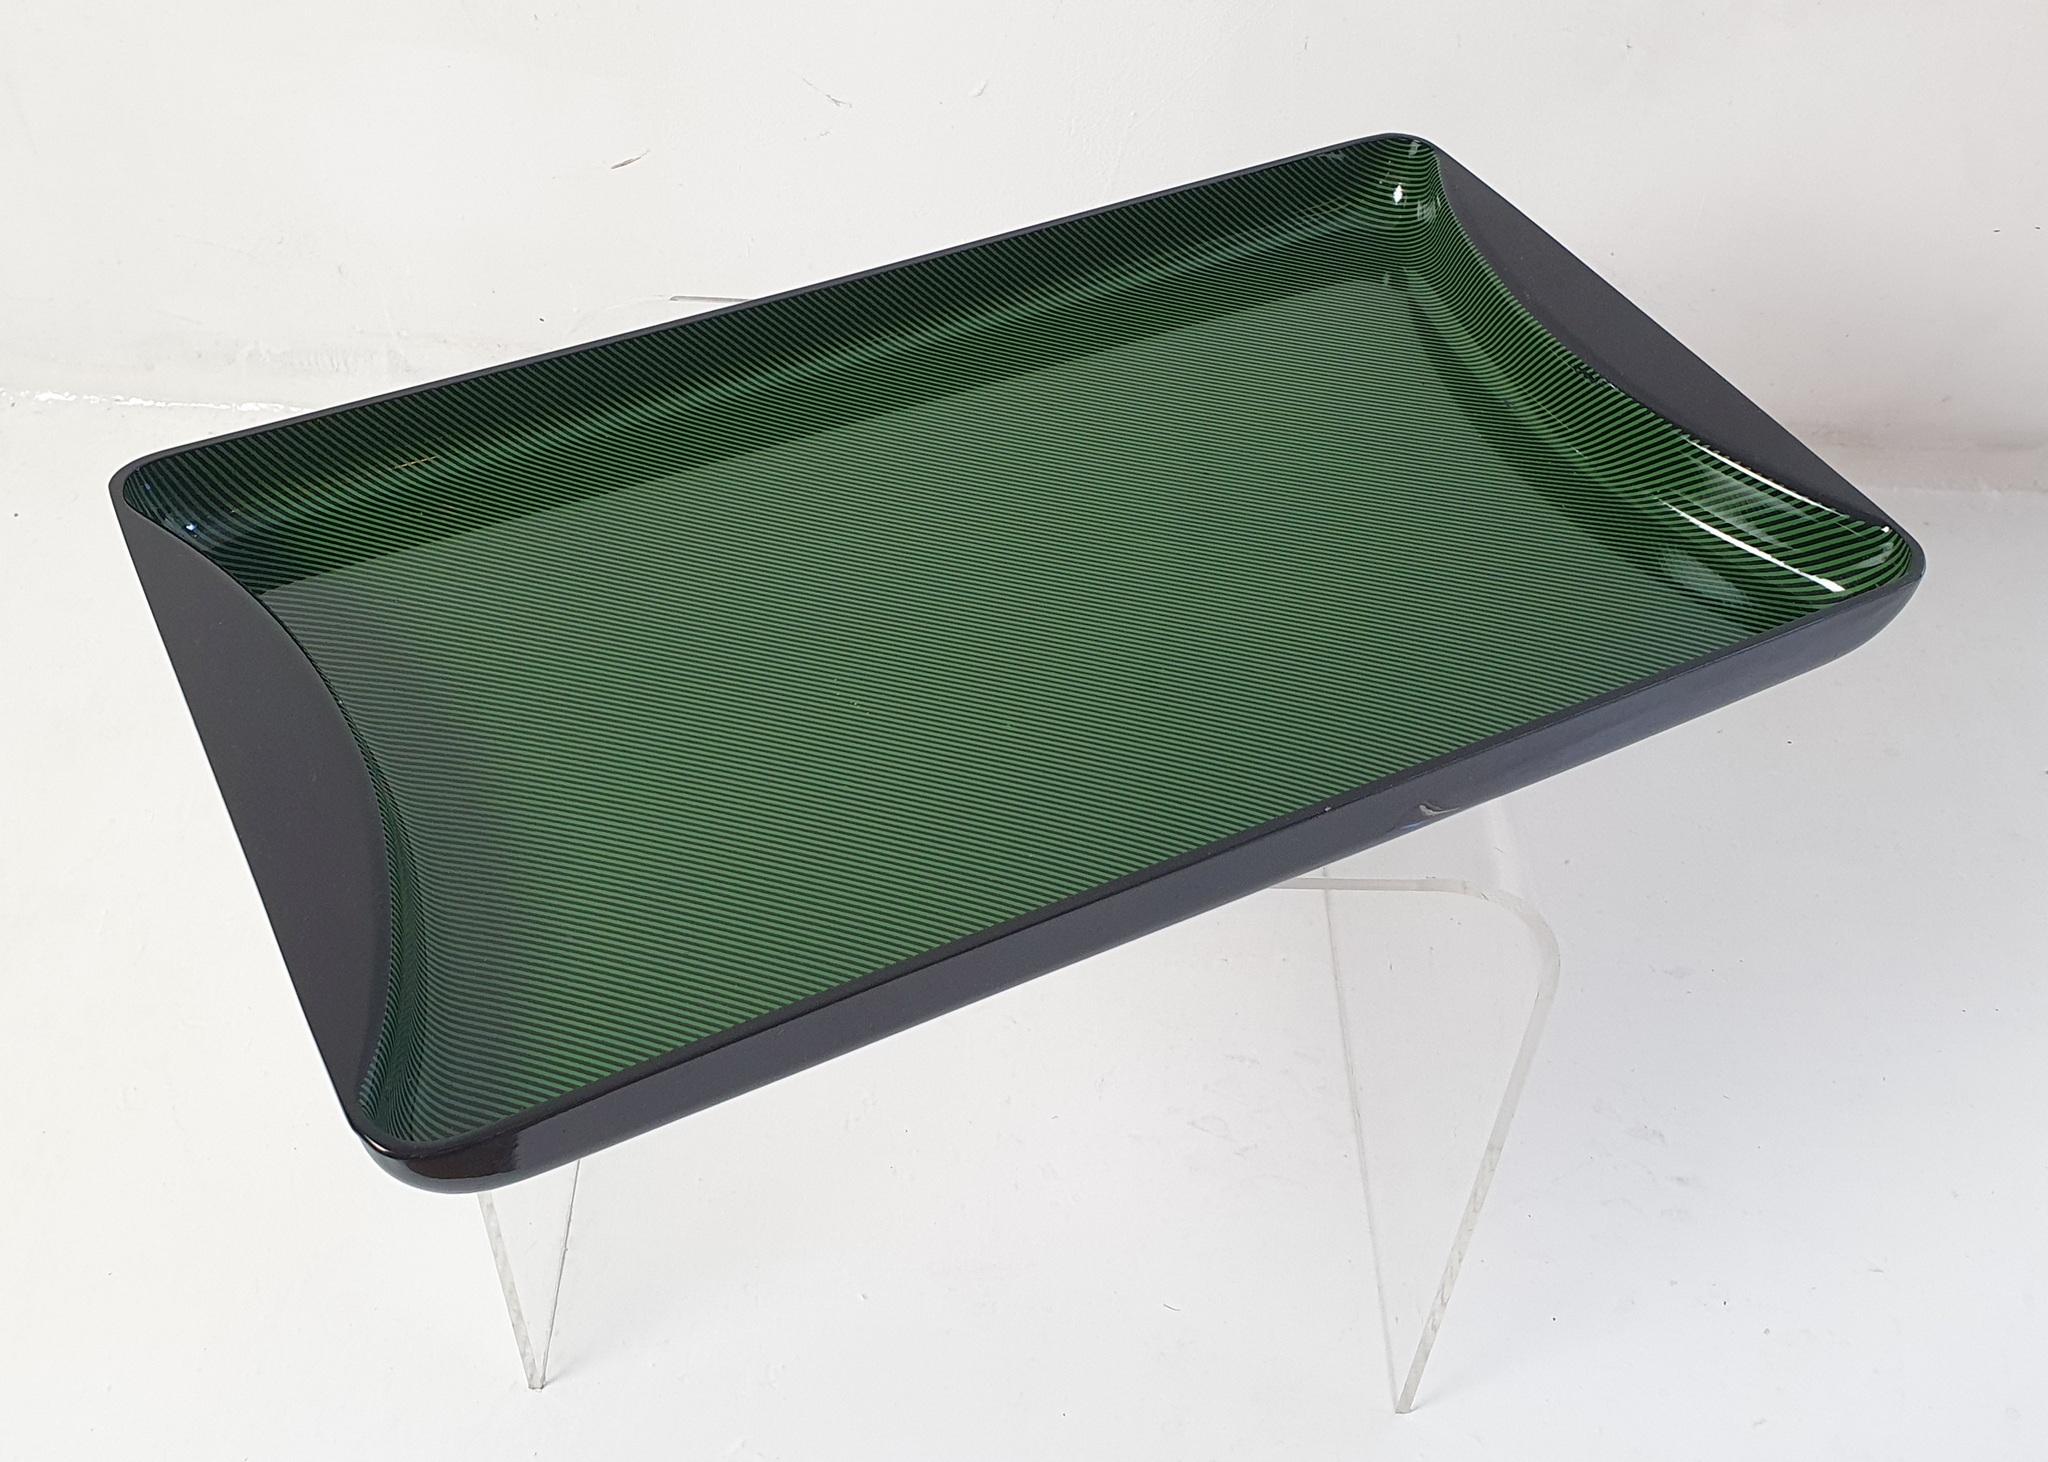 Striped Vintage Tray in Lucite by Guzzini 1970's Italy For Sale 1